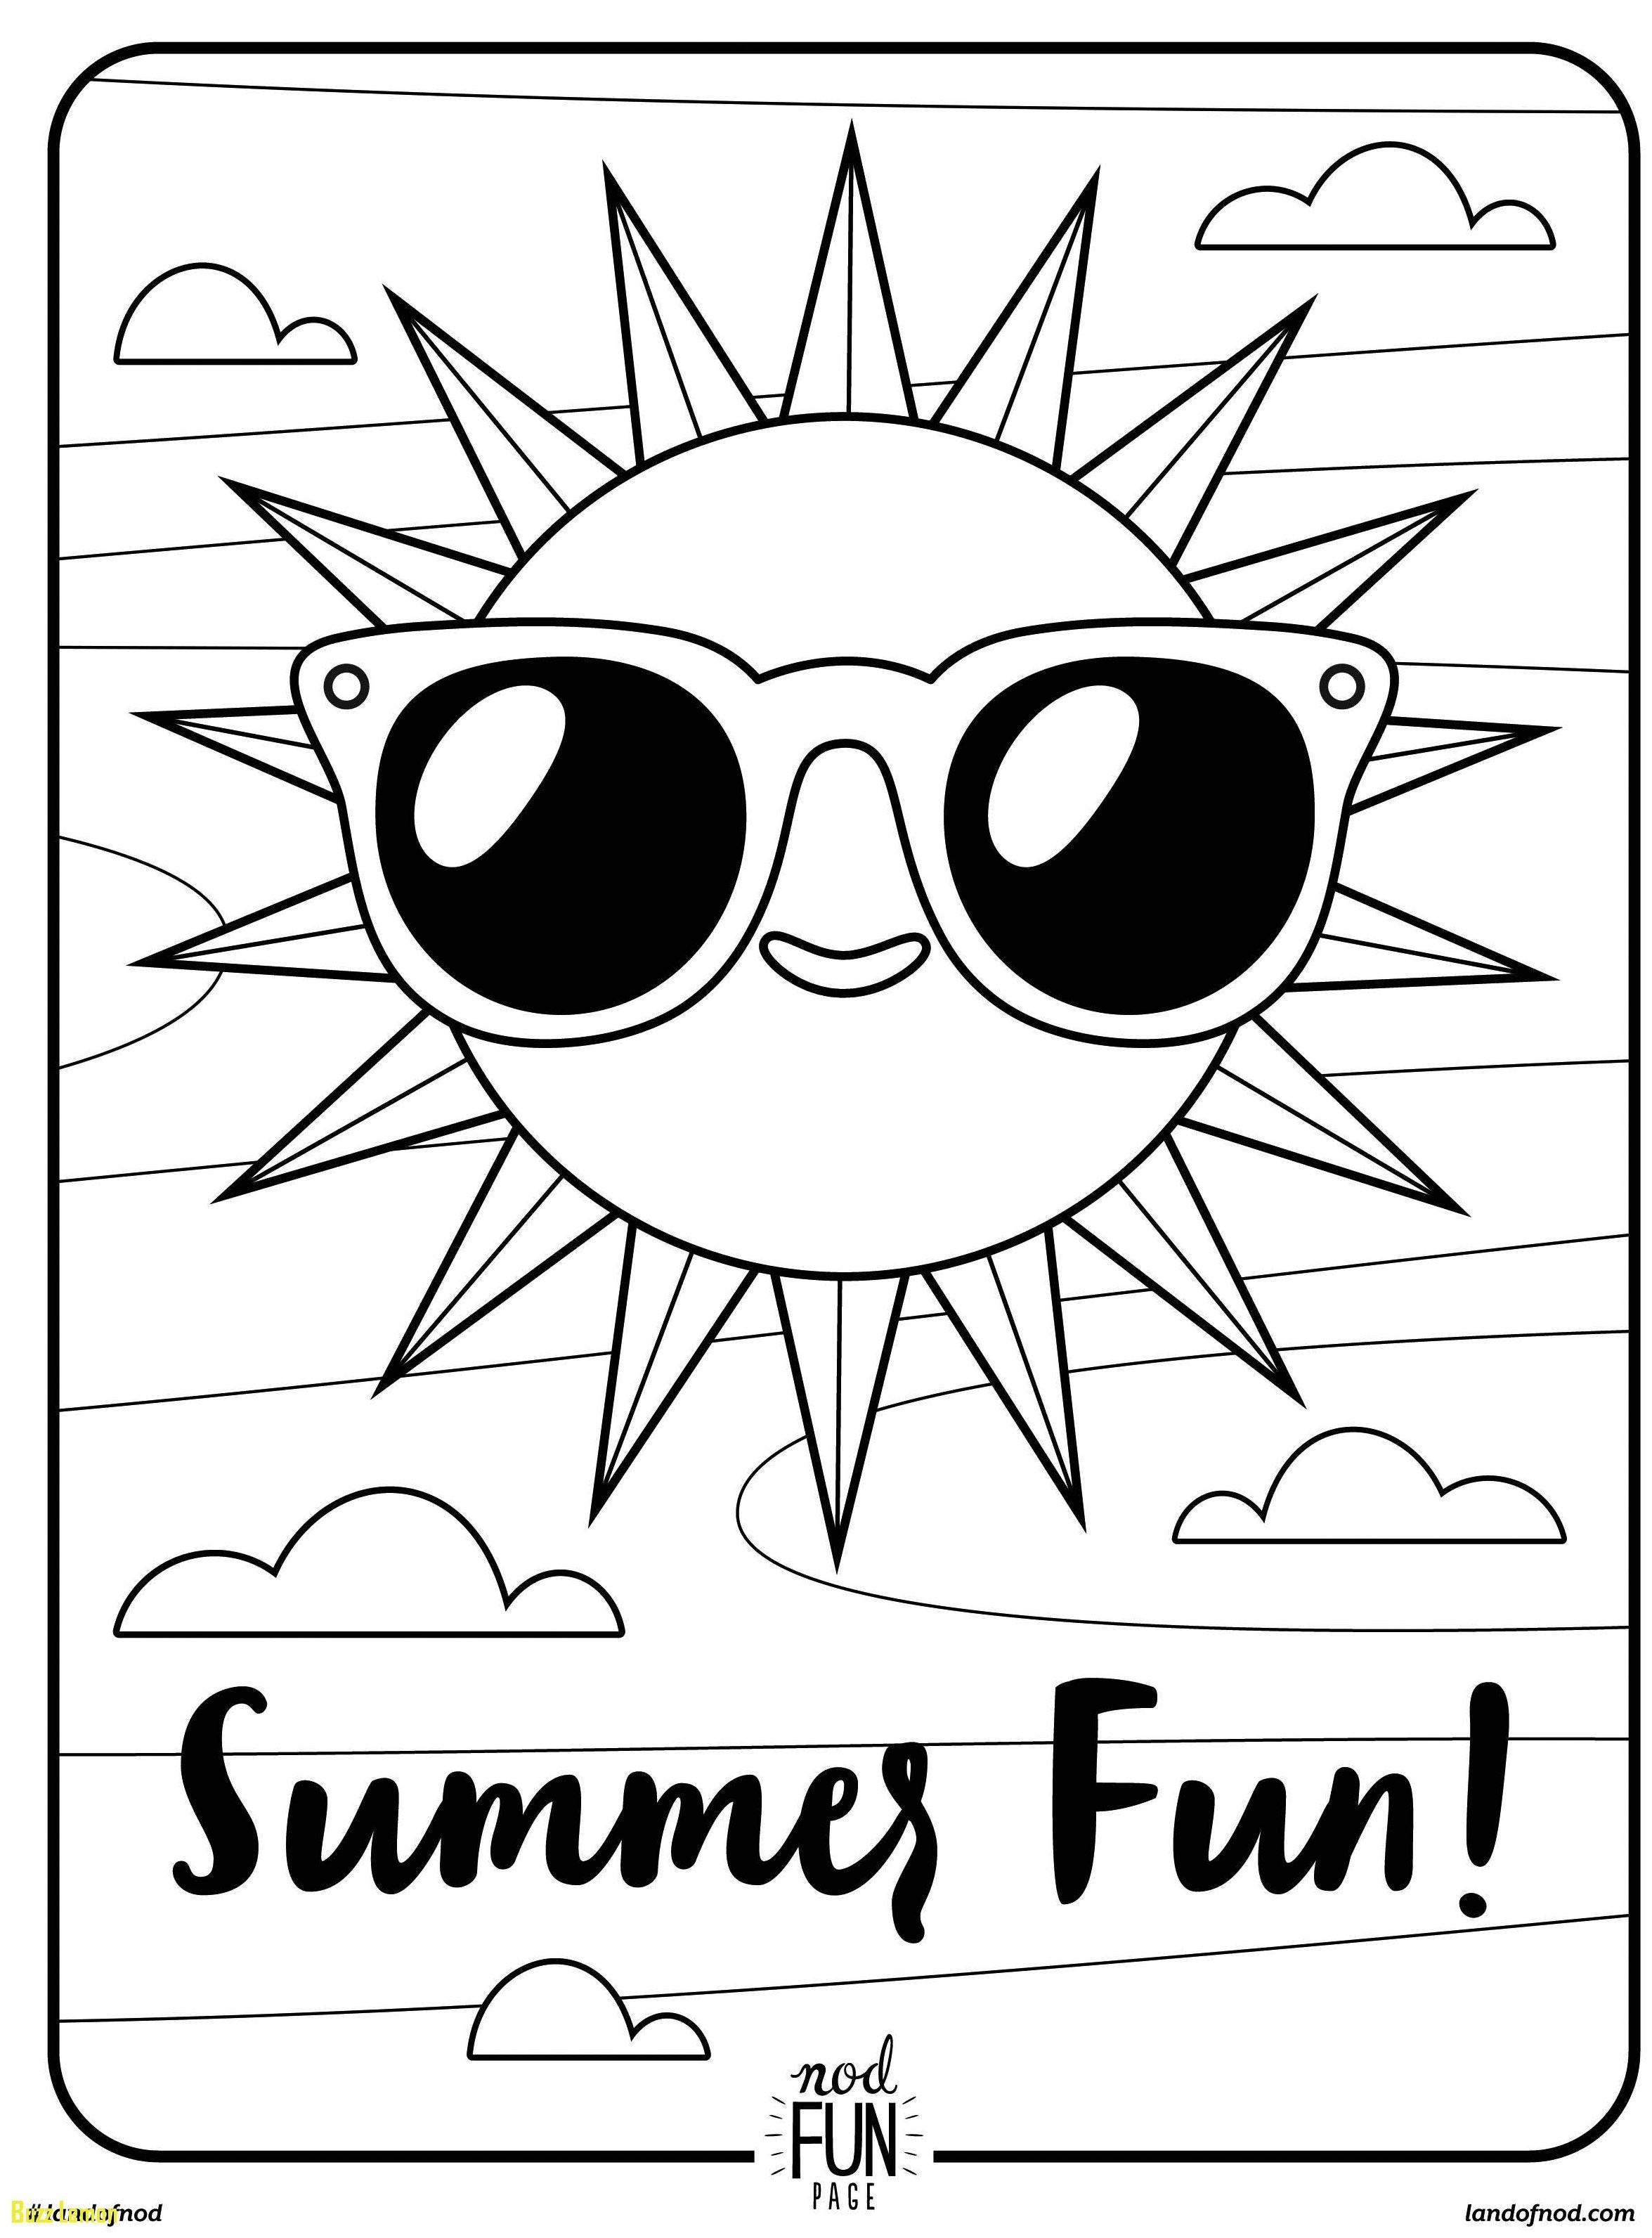 Summer Coloring Pages Free Bright Ideas Free Summer Coloring Pages Printable New Fun Page